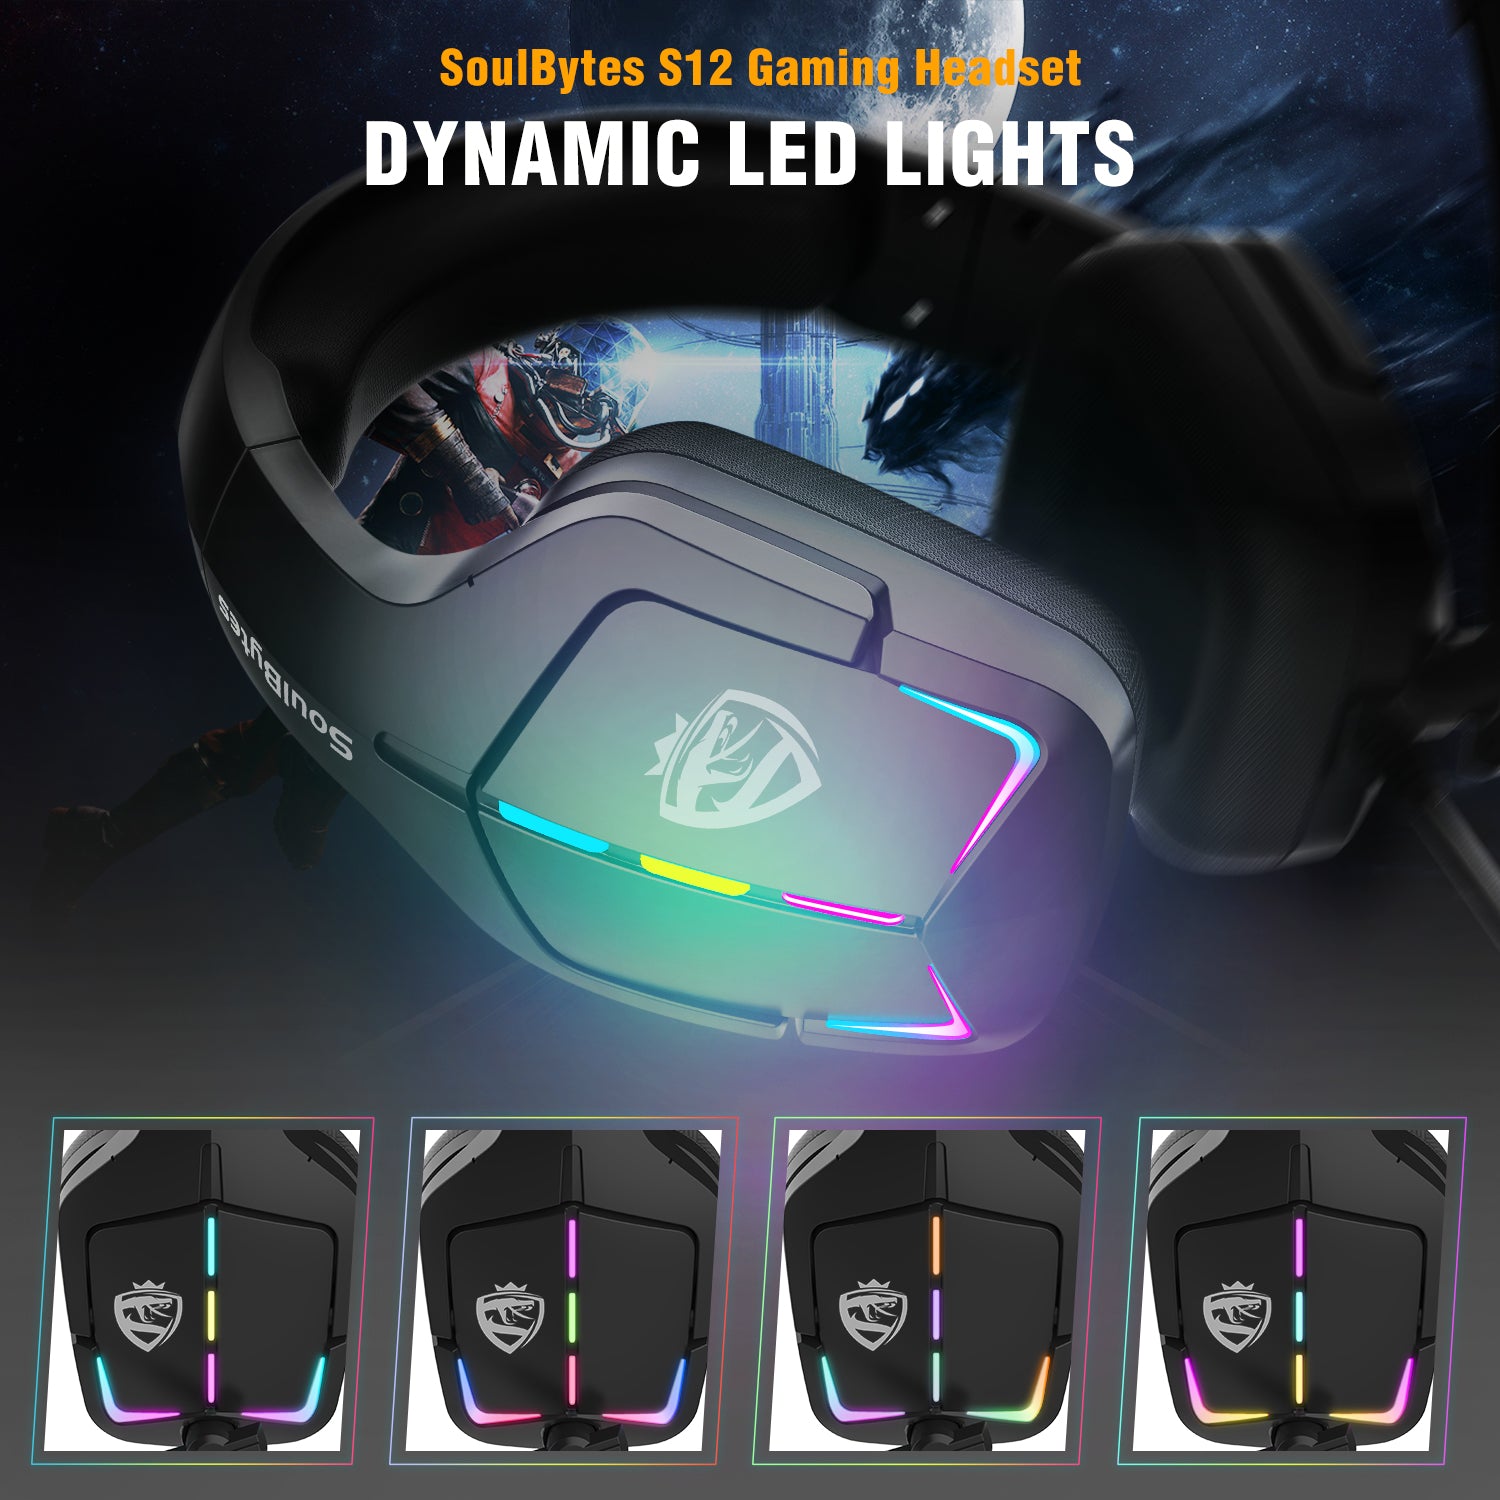 RGB LED Light Display Wintory Soulbytes S12 Gaming Headset Wintory